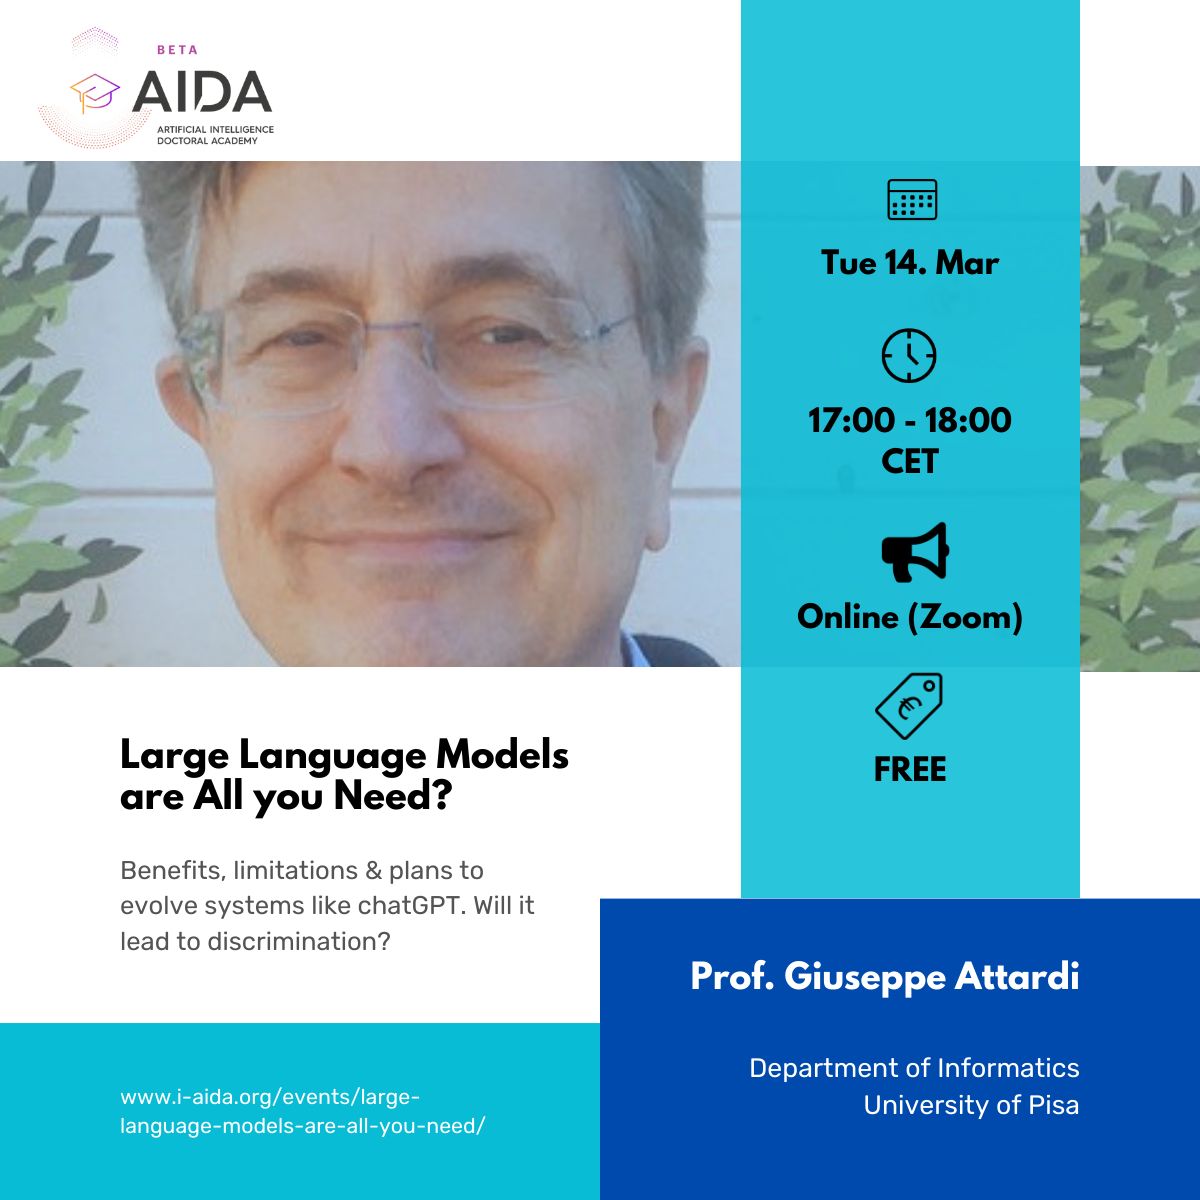 Lecture “Large Language Models are All we Need?” by Prof. Giuseppe Attardi